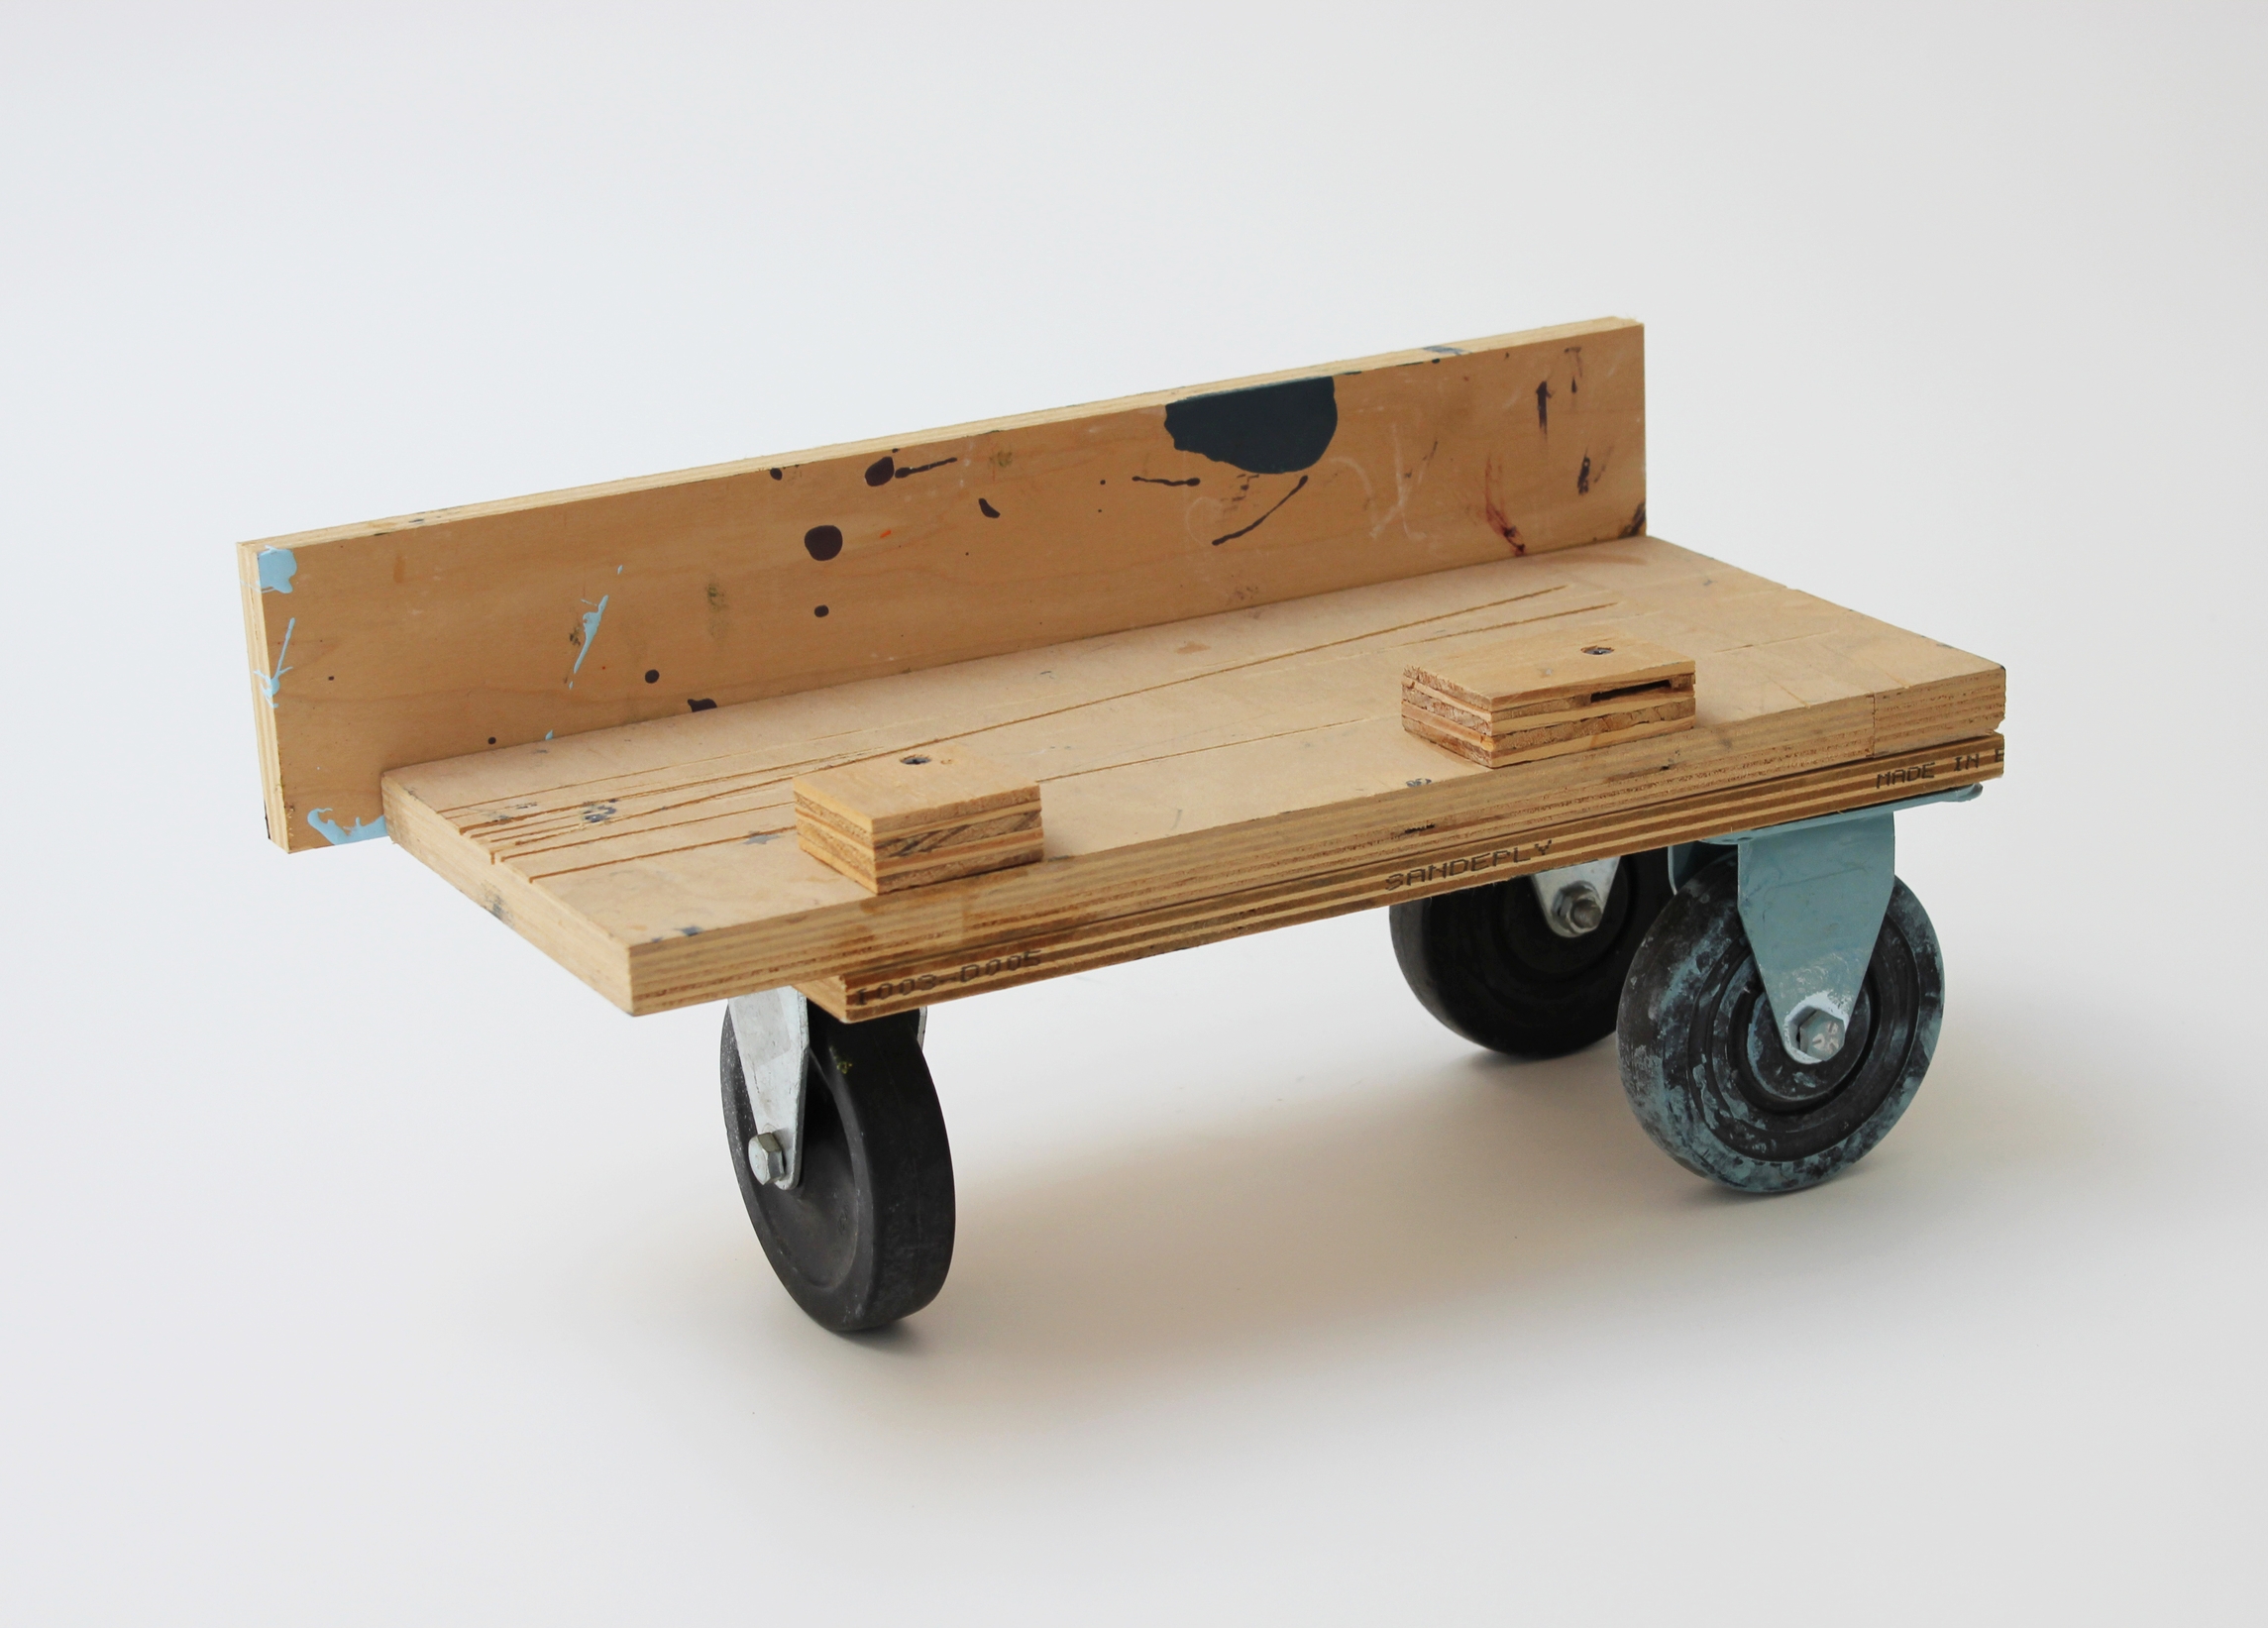  Small Rolling Platform #71 2015 8.5 x 17 x 7.75 inches 